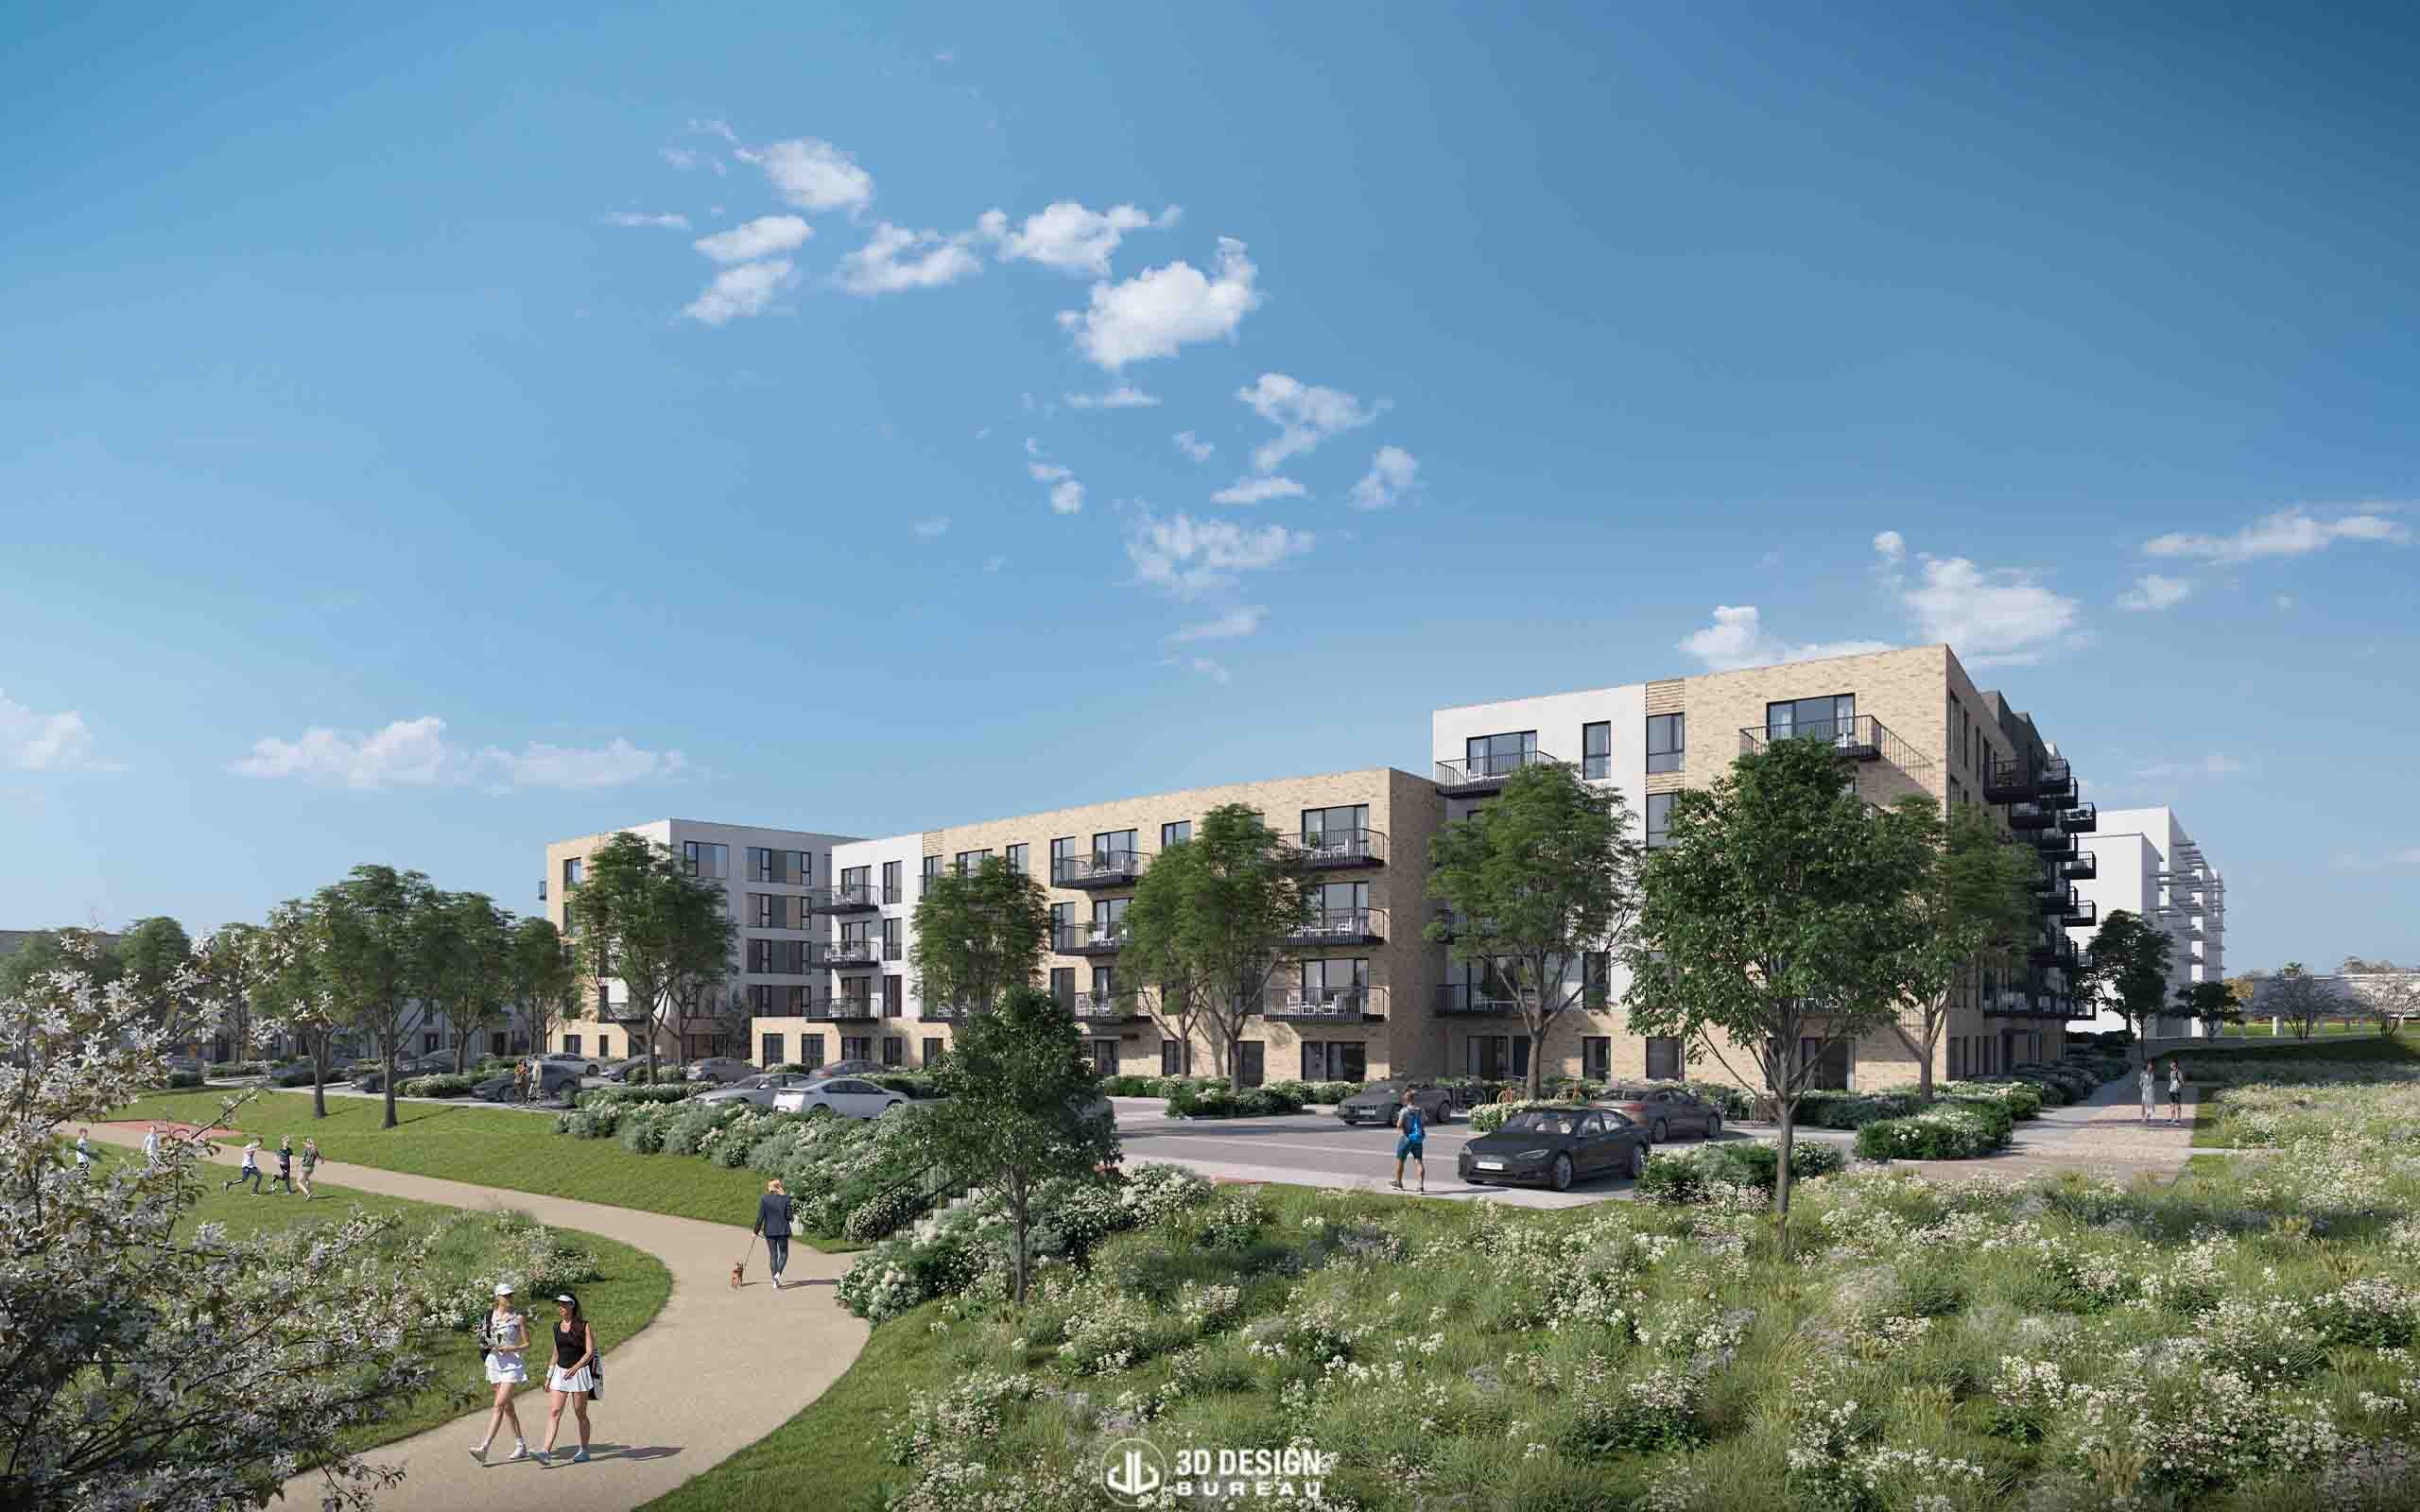 Architectural computer generated imagery of the proposed development in Clonburris